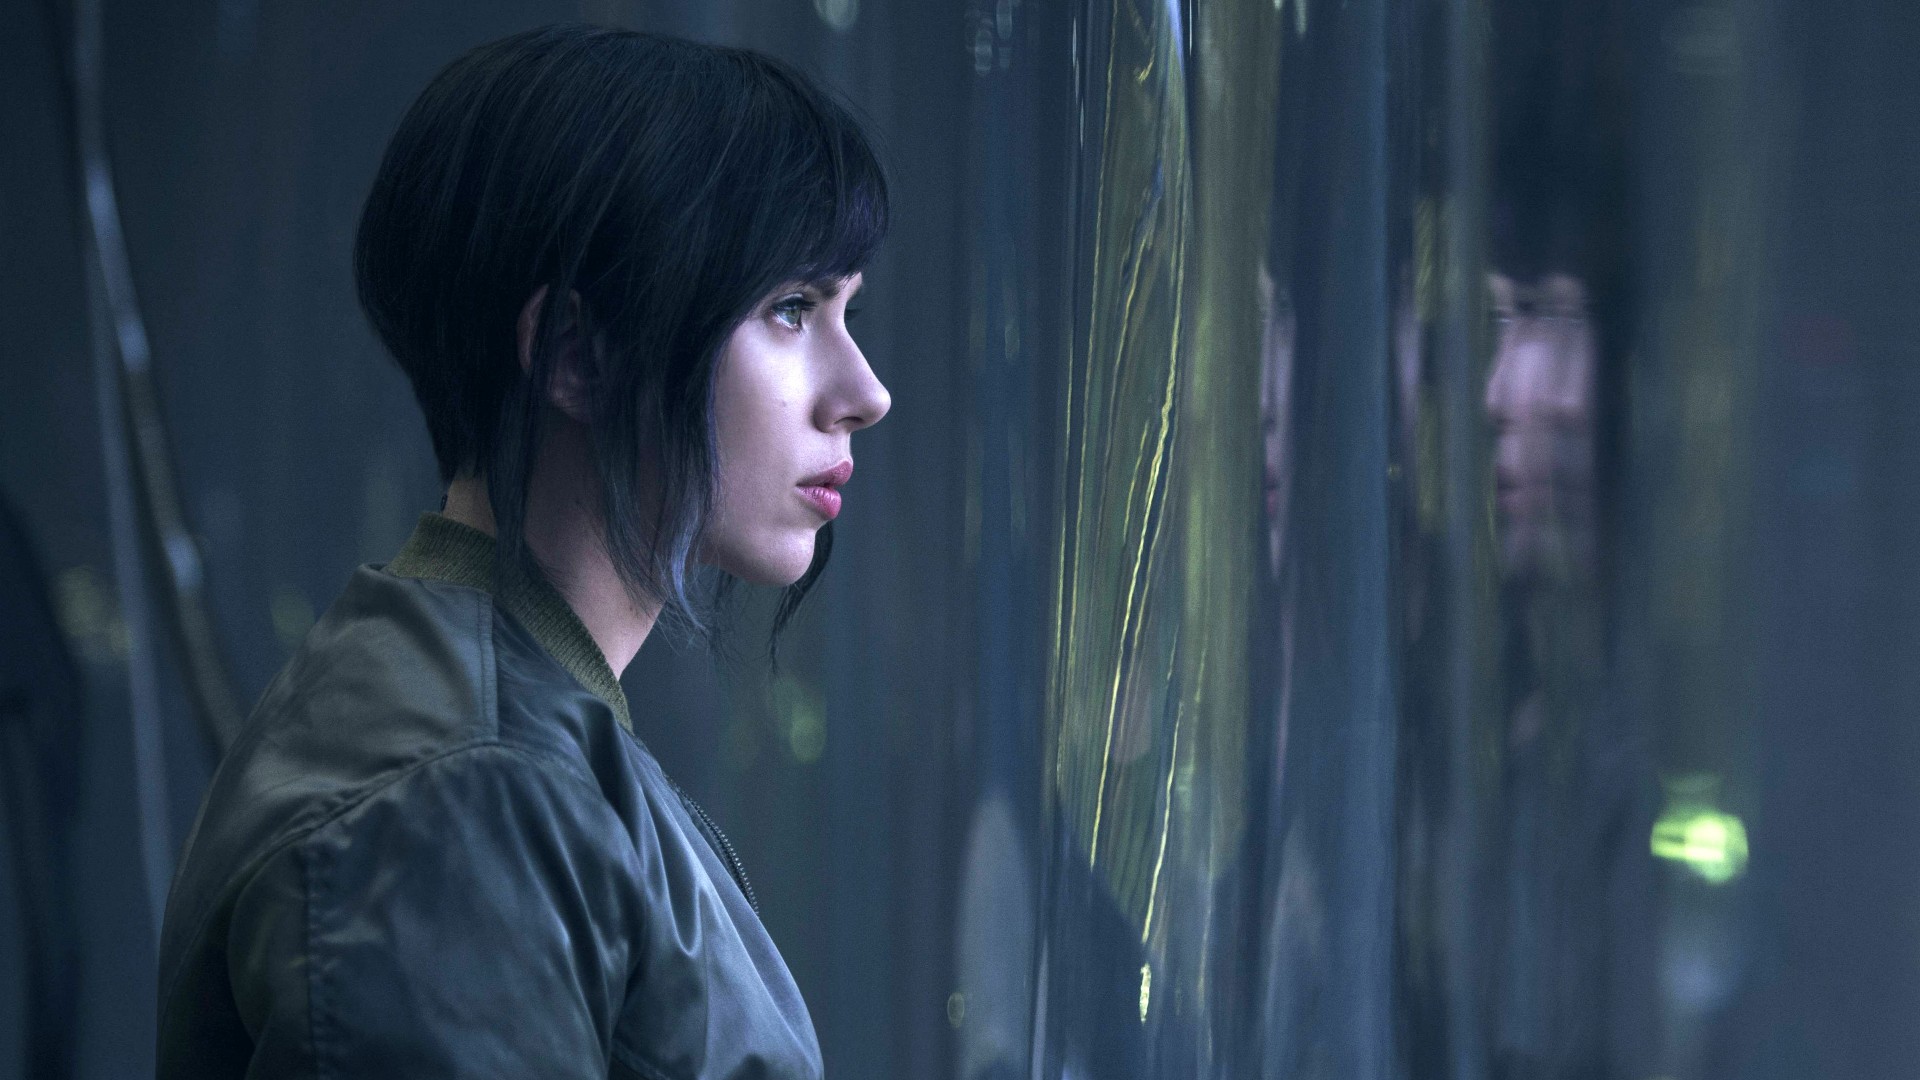 ghost in the shell wallpaper hd,face,black hair,human,eye,darkness